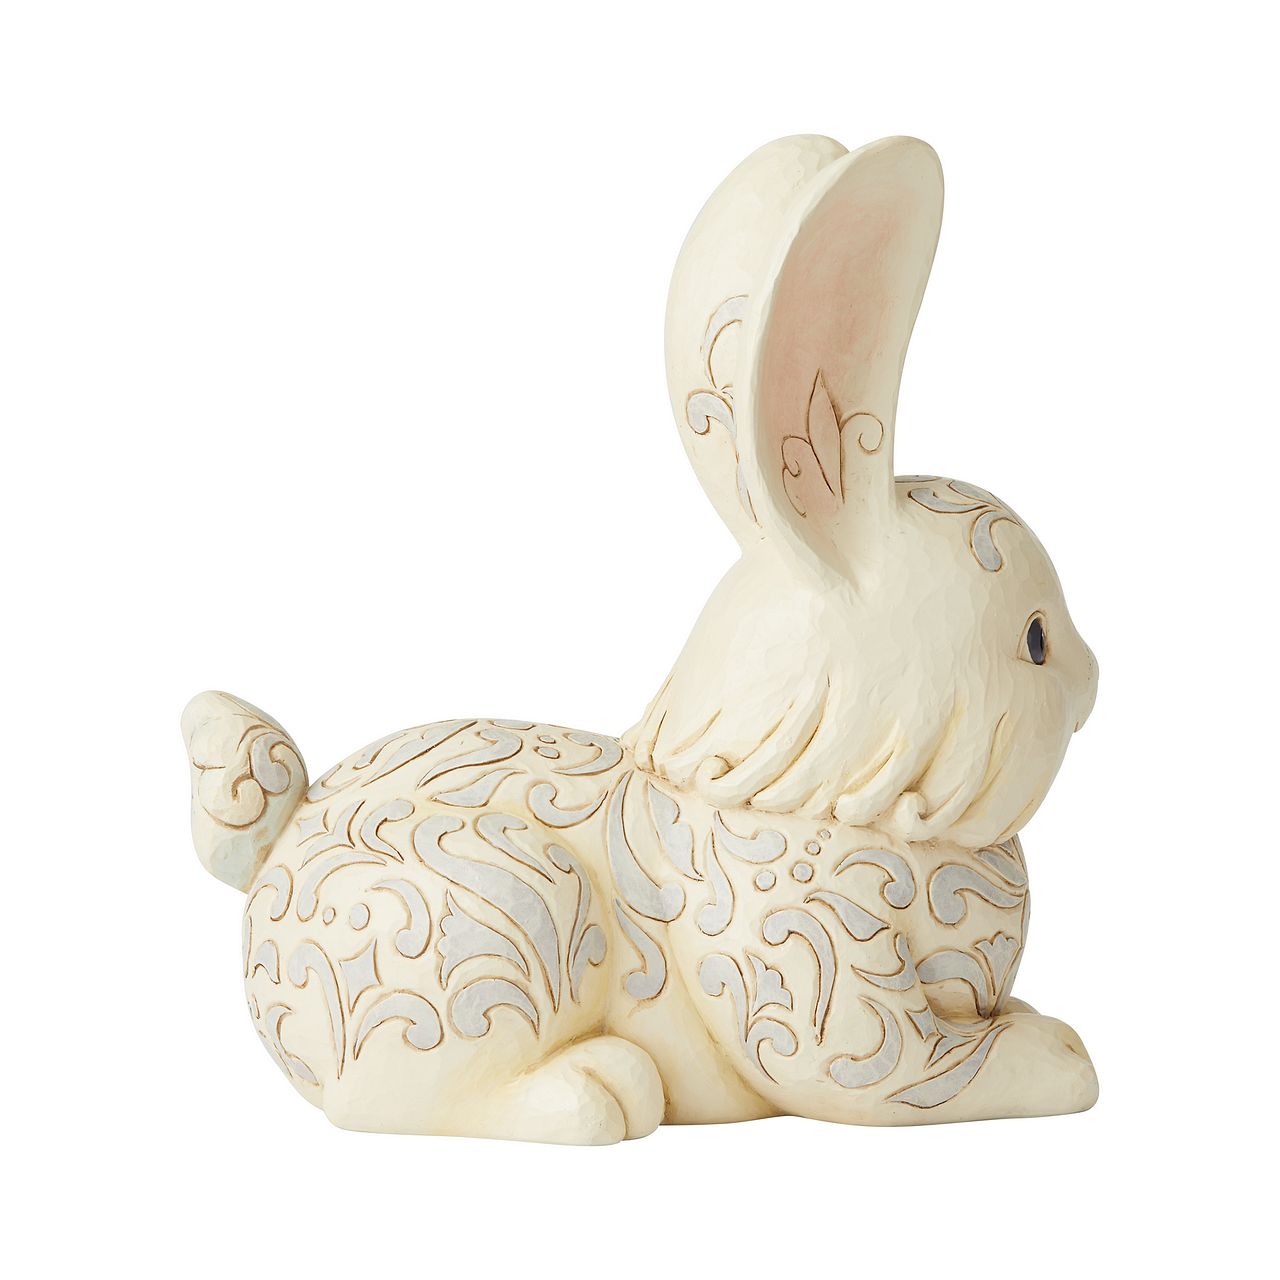 Jim Shore White Woodland Bunny Garden Statue  Decorated with Jim Shore's distinctive folk-art designs, this Bunny Garden Statue is a light-hearted accent to any outdoor setting. Handcrafted with Jim's signature attention to detail, this charming design is specially treated for outside display.